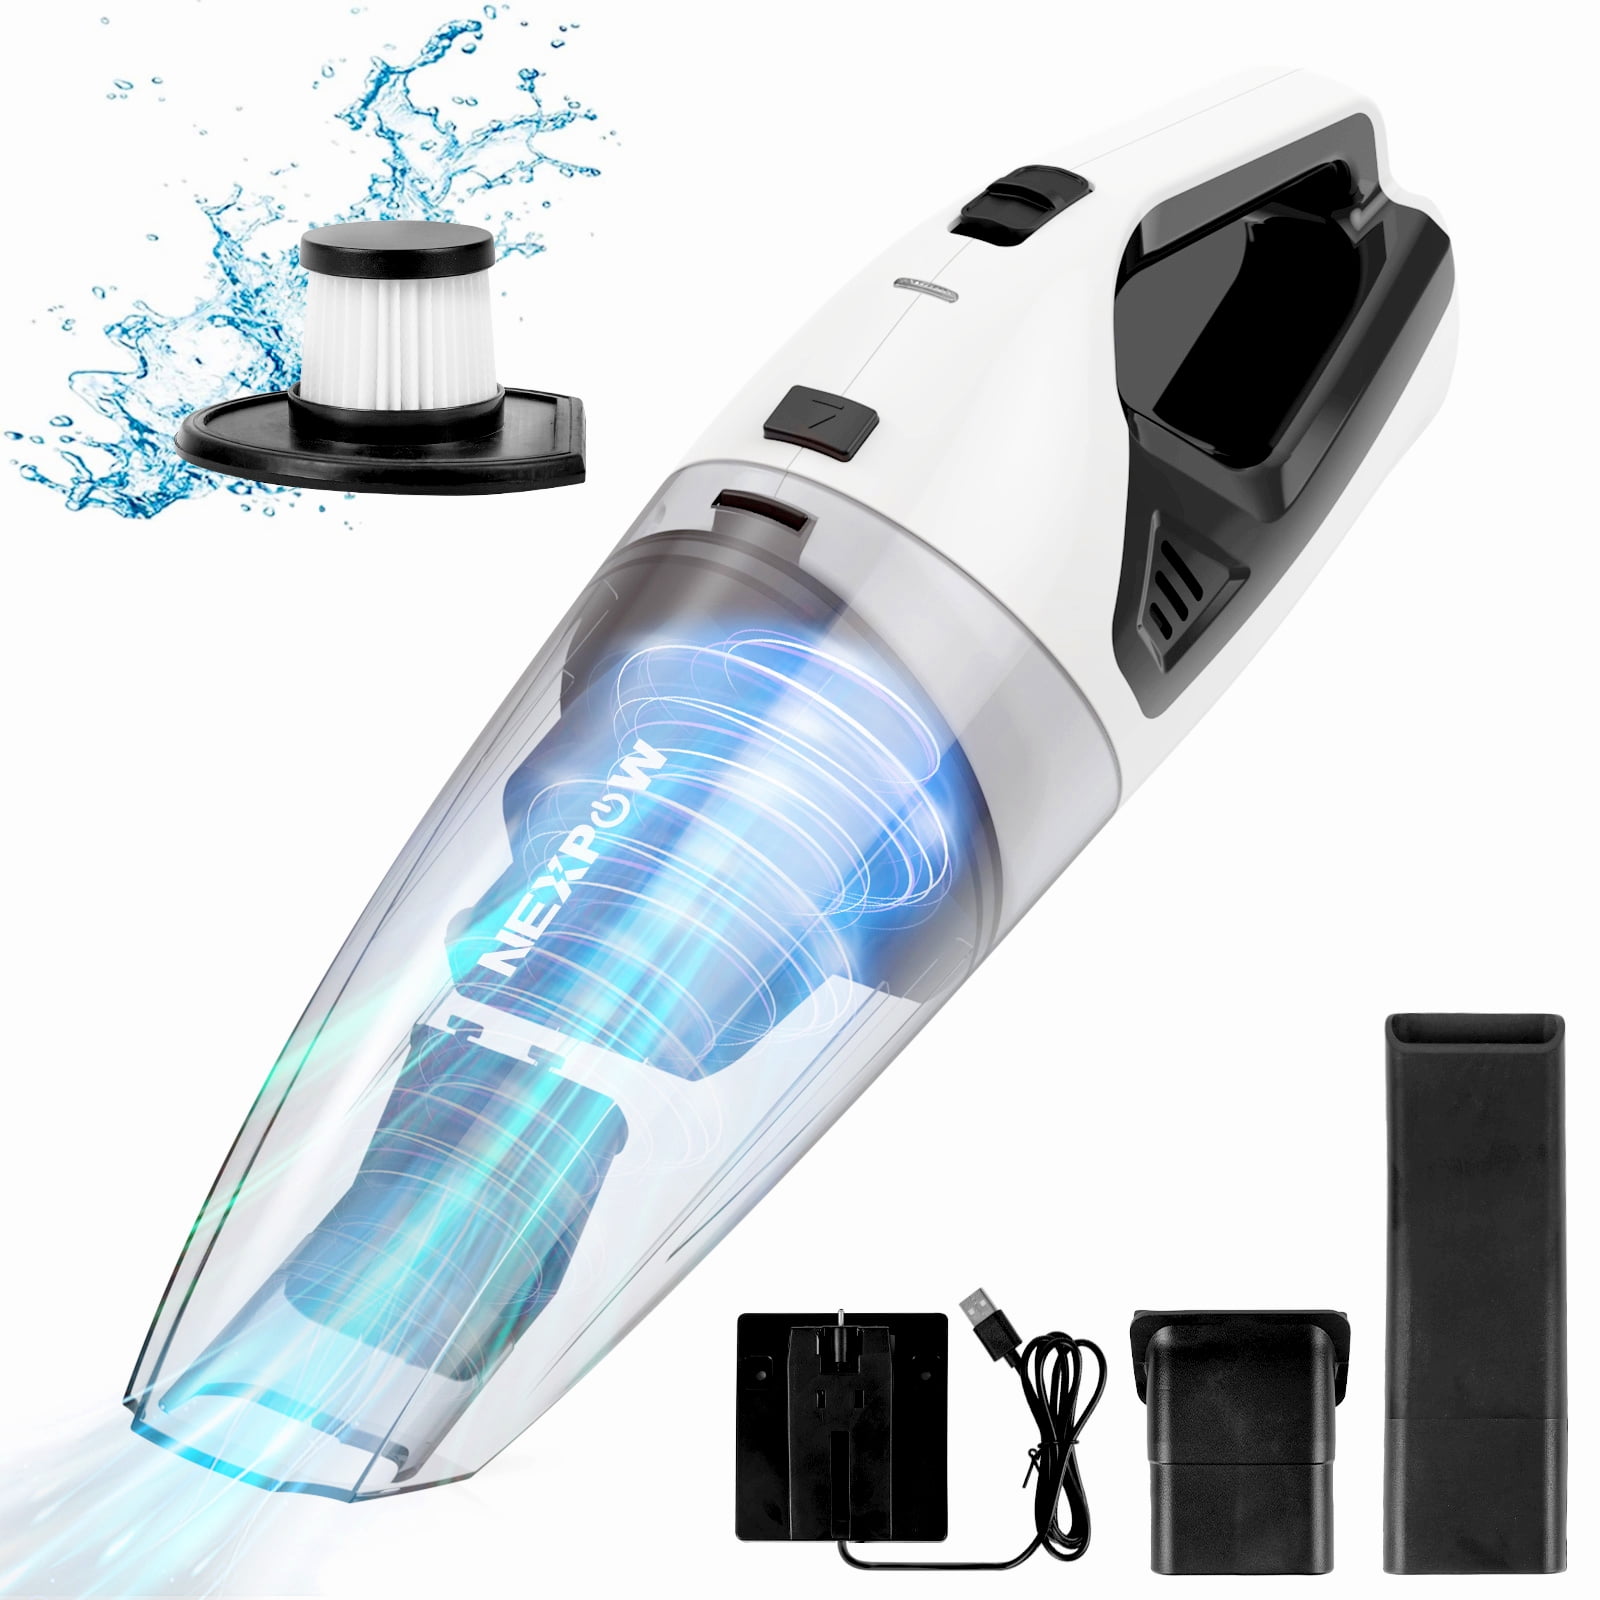 Handheld Wireless Vacuum Cleaner - Not sold in stores